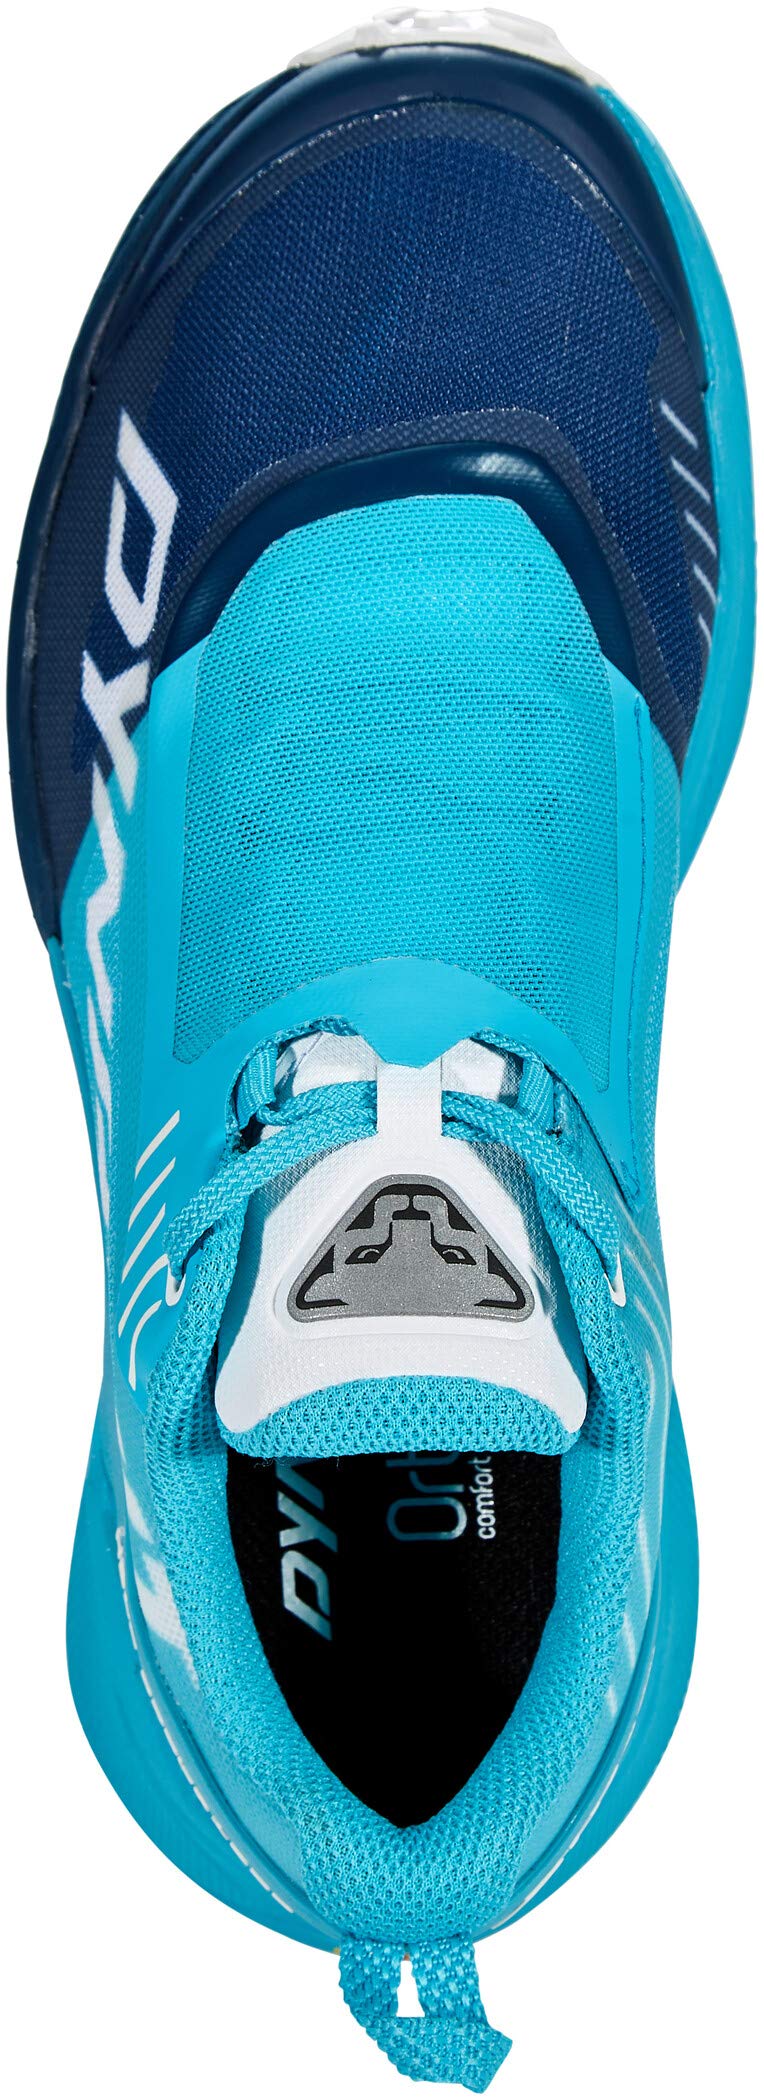 Dynafit Ultra 100 Trail Women's Running Shoes - AW20-10.5 - Blue